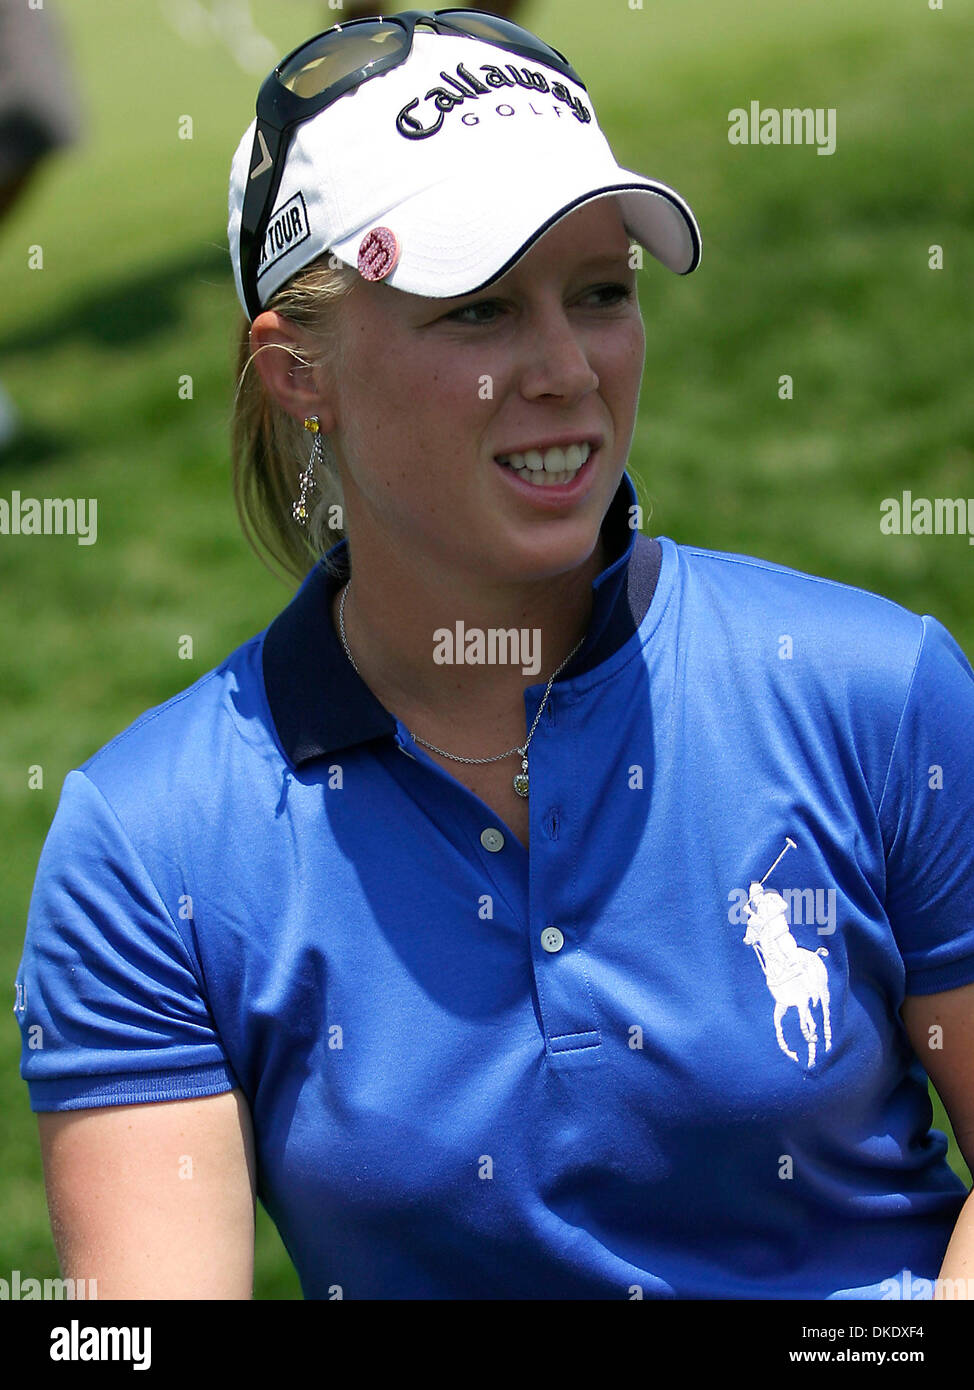 Jun 07, 2007 - Havre de Grace, Maryland, USA -  19 year old MORGAN PRESSEL after round 1 at the McDonalds LPGA Champaionship event on Thursday. Pressel finished the first round tied for 4th place at 4 under par.   (Credit Image: © James Berglie/ZUMA Press) Stock Photo